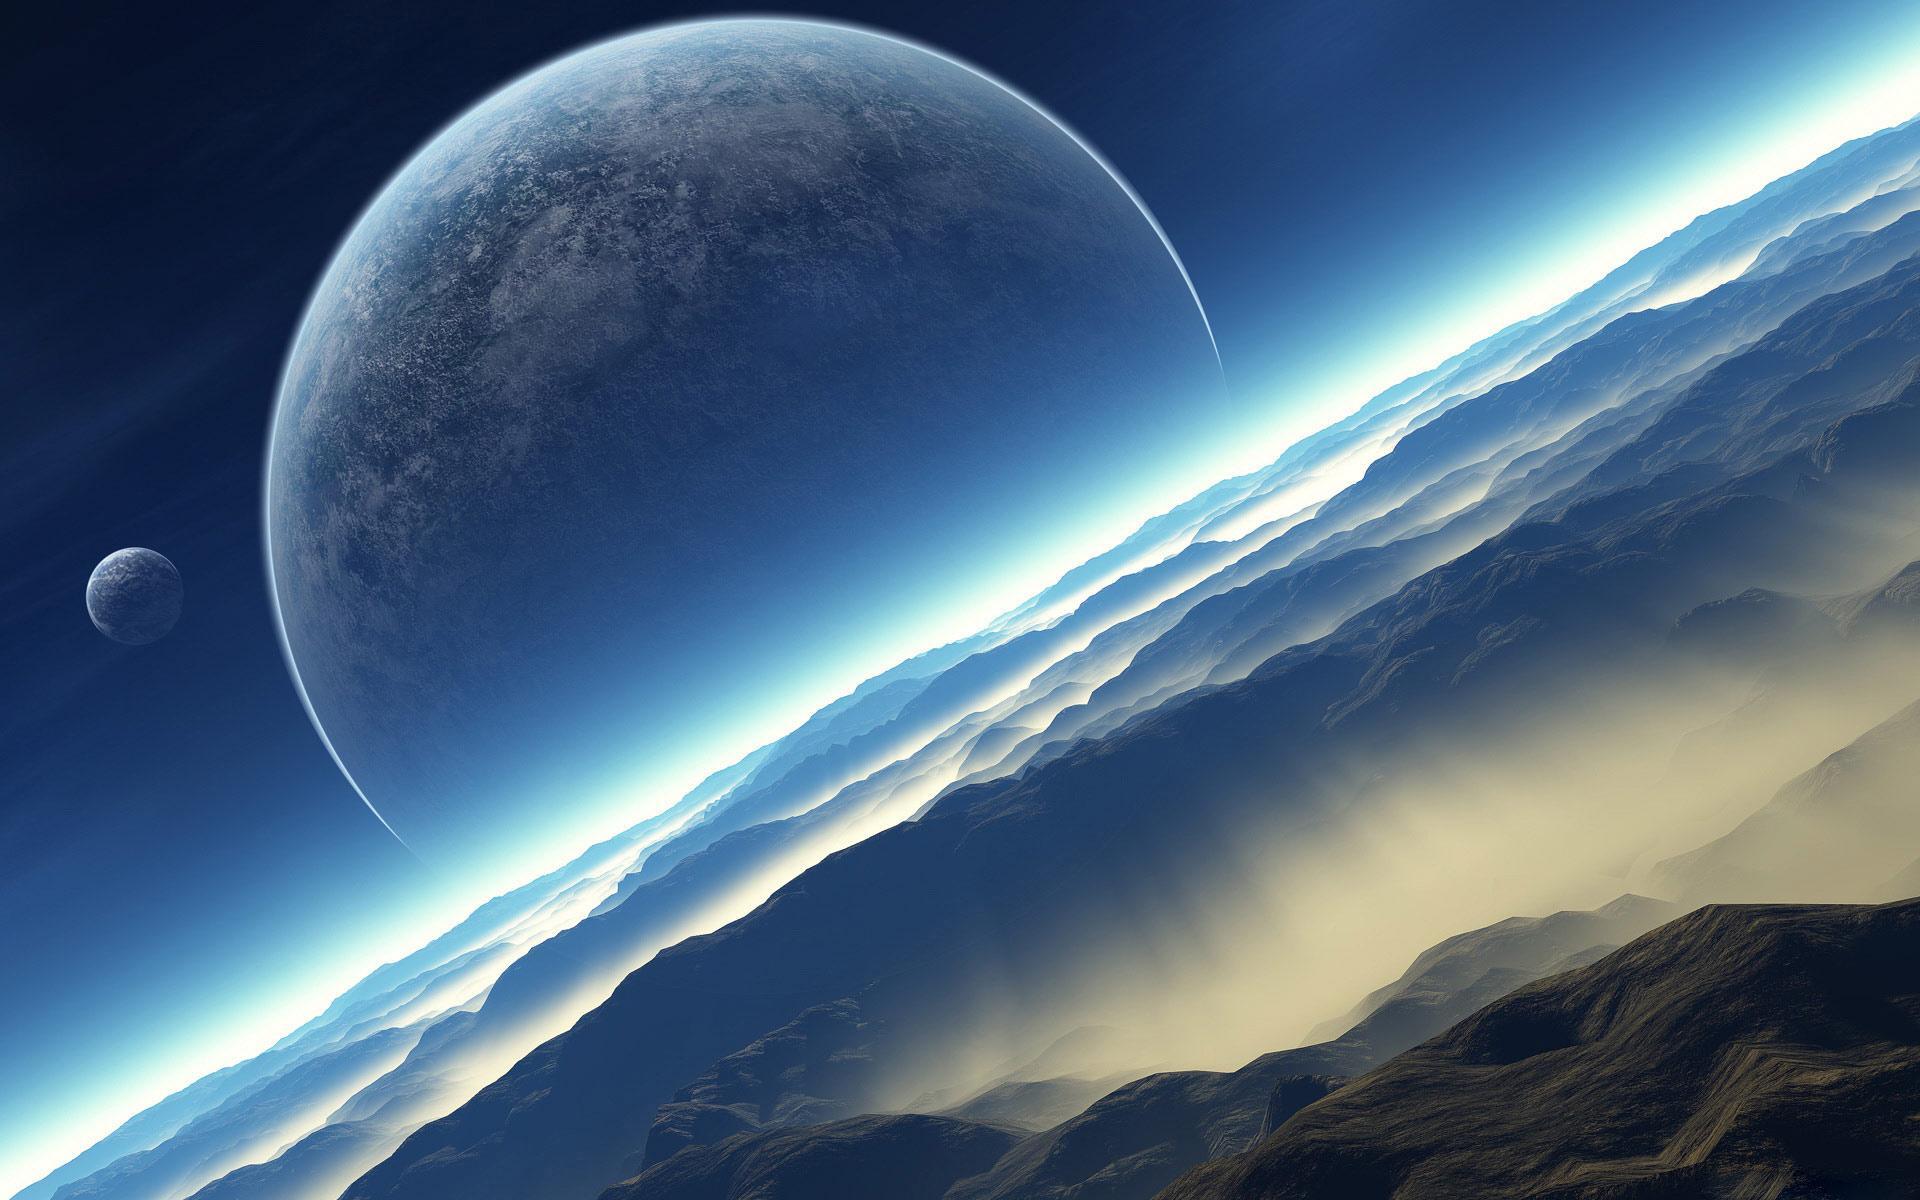 Stunning space landscape with a planet and a floating basket.